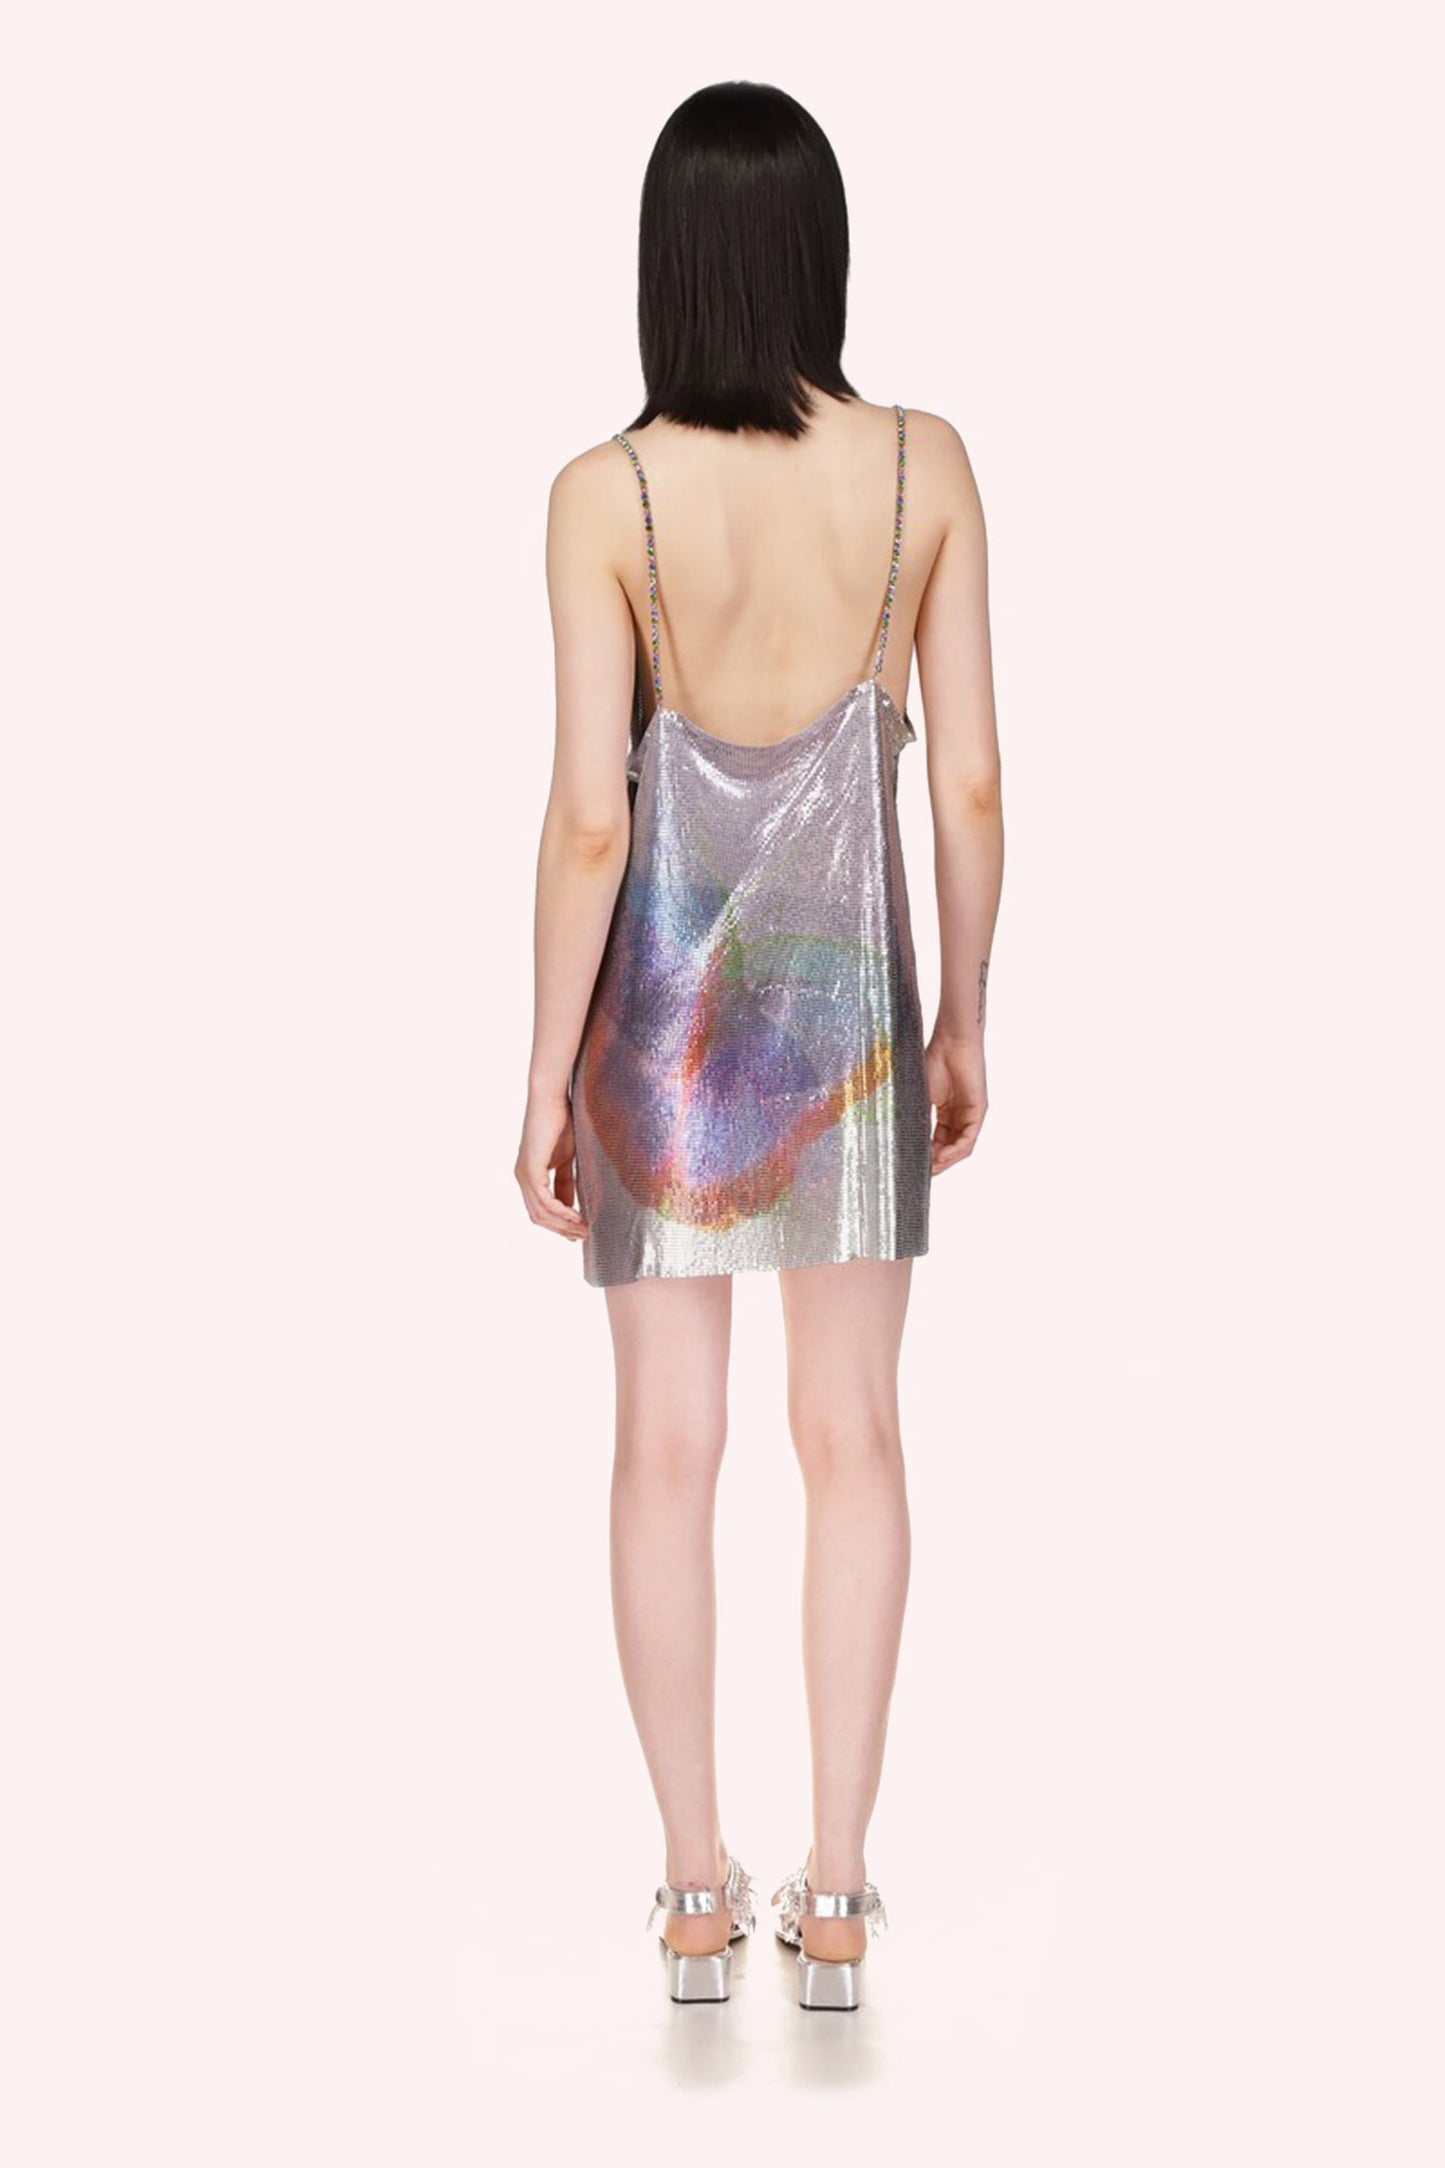 Impressionism Butterfly Silver Skirt Loose-fitting dress with bare back, same design color pattern